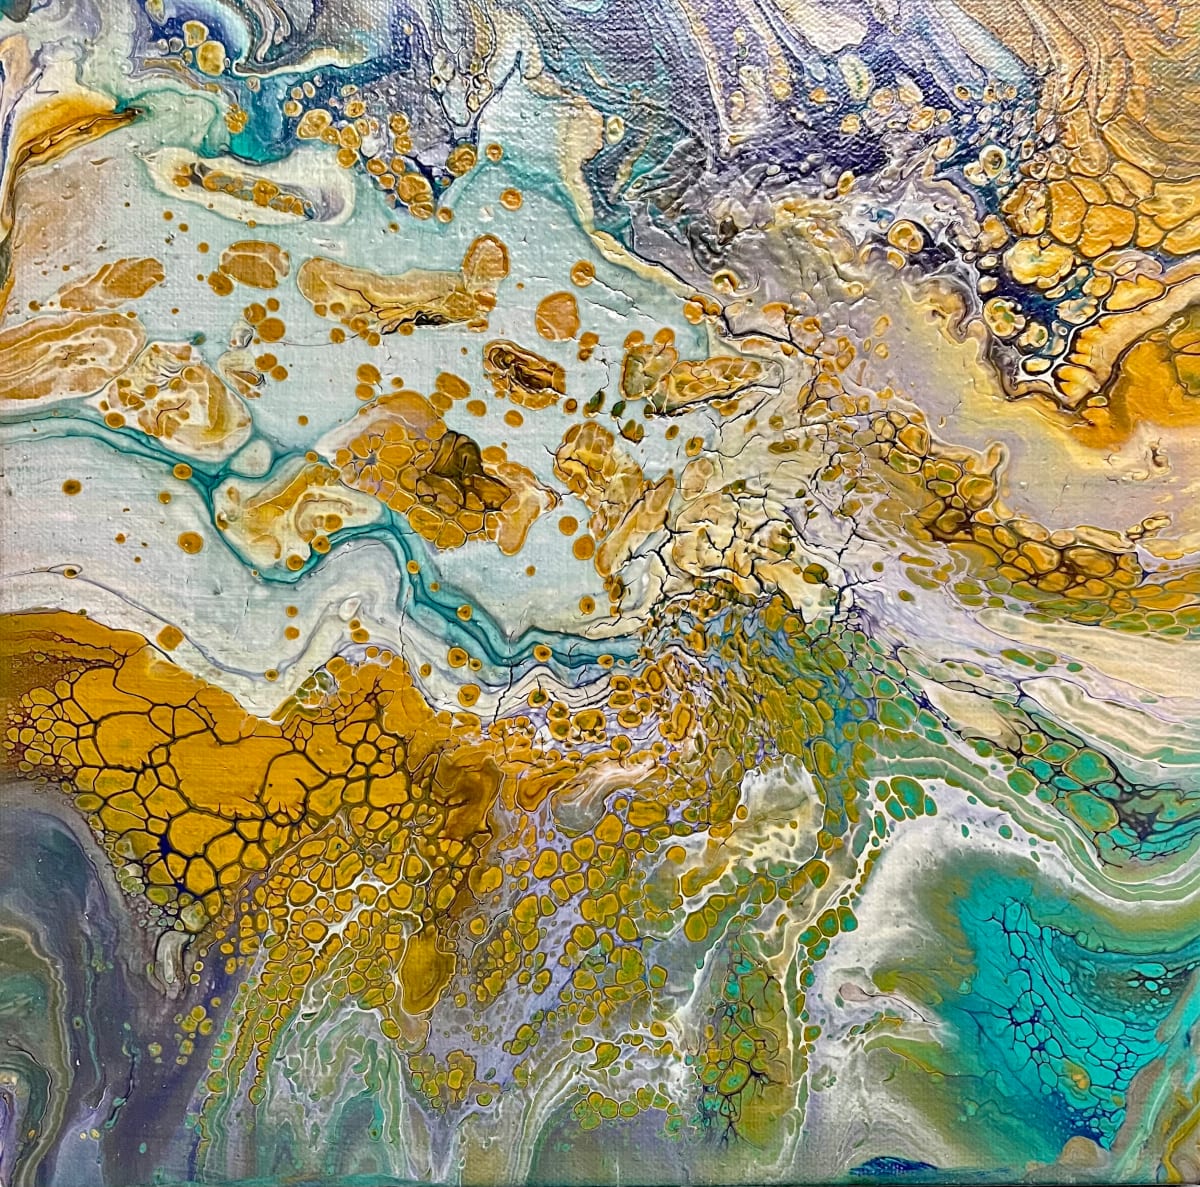 Swirls by Vasu Tolia  Image: This abstract artwork depicts golden, turquise and violet hues swirling and twirling into wave formations.